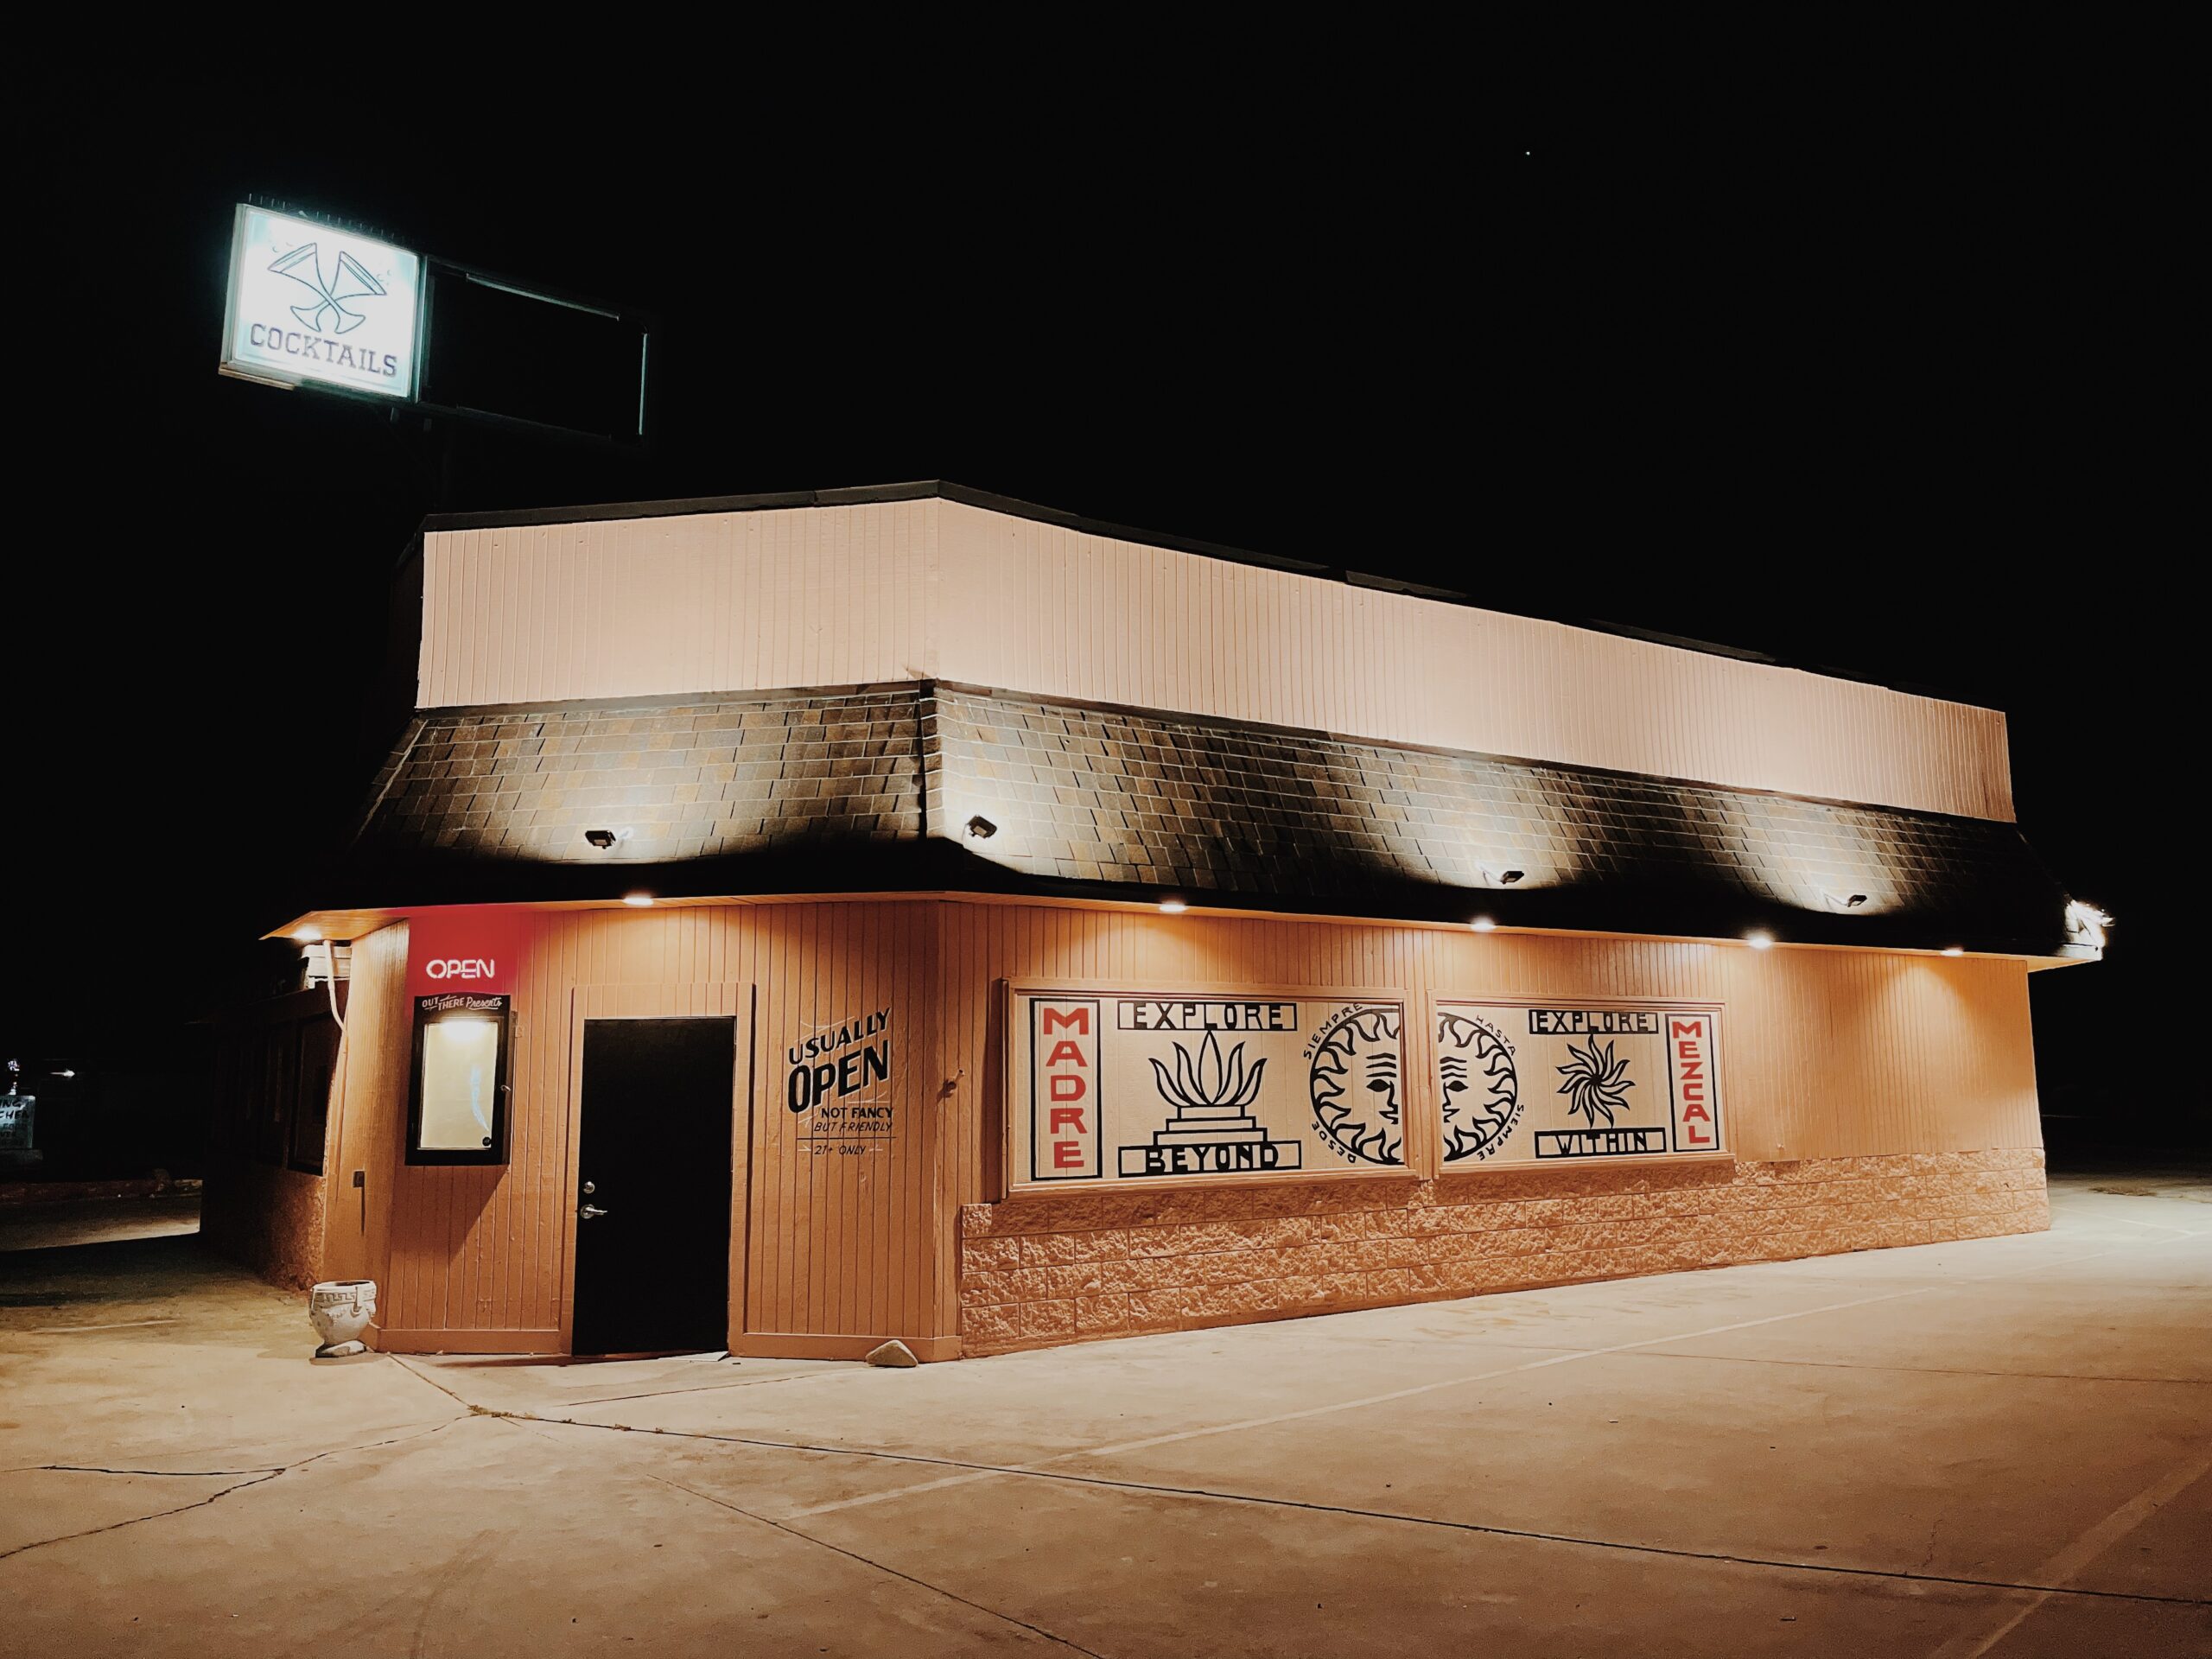 Exterior night time view of Out There Bar located in Twentynine Palms, California.